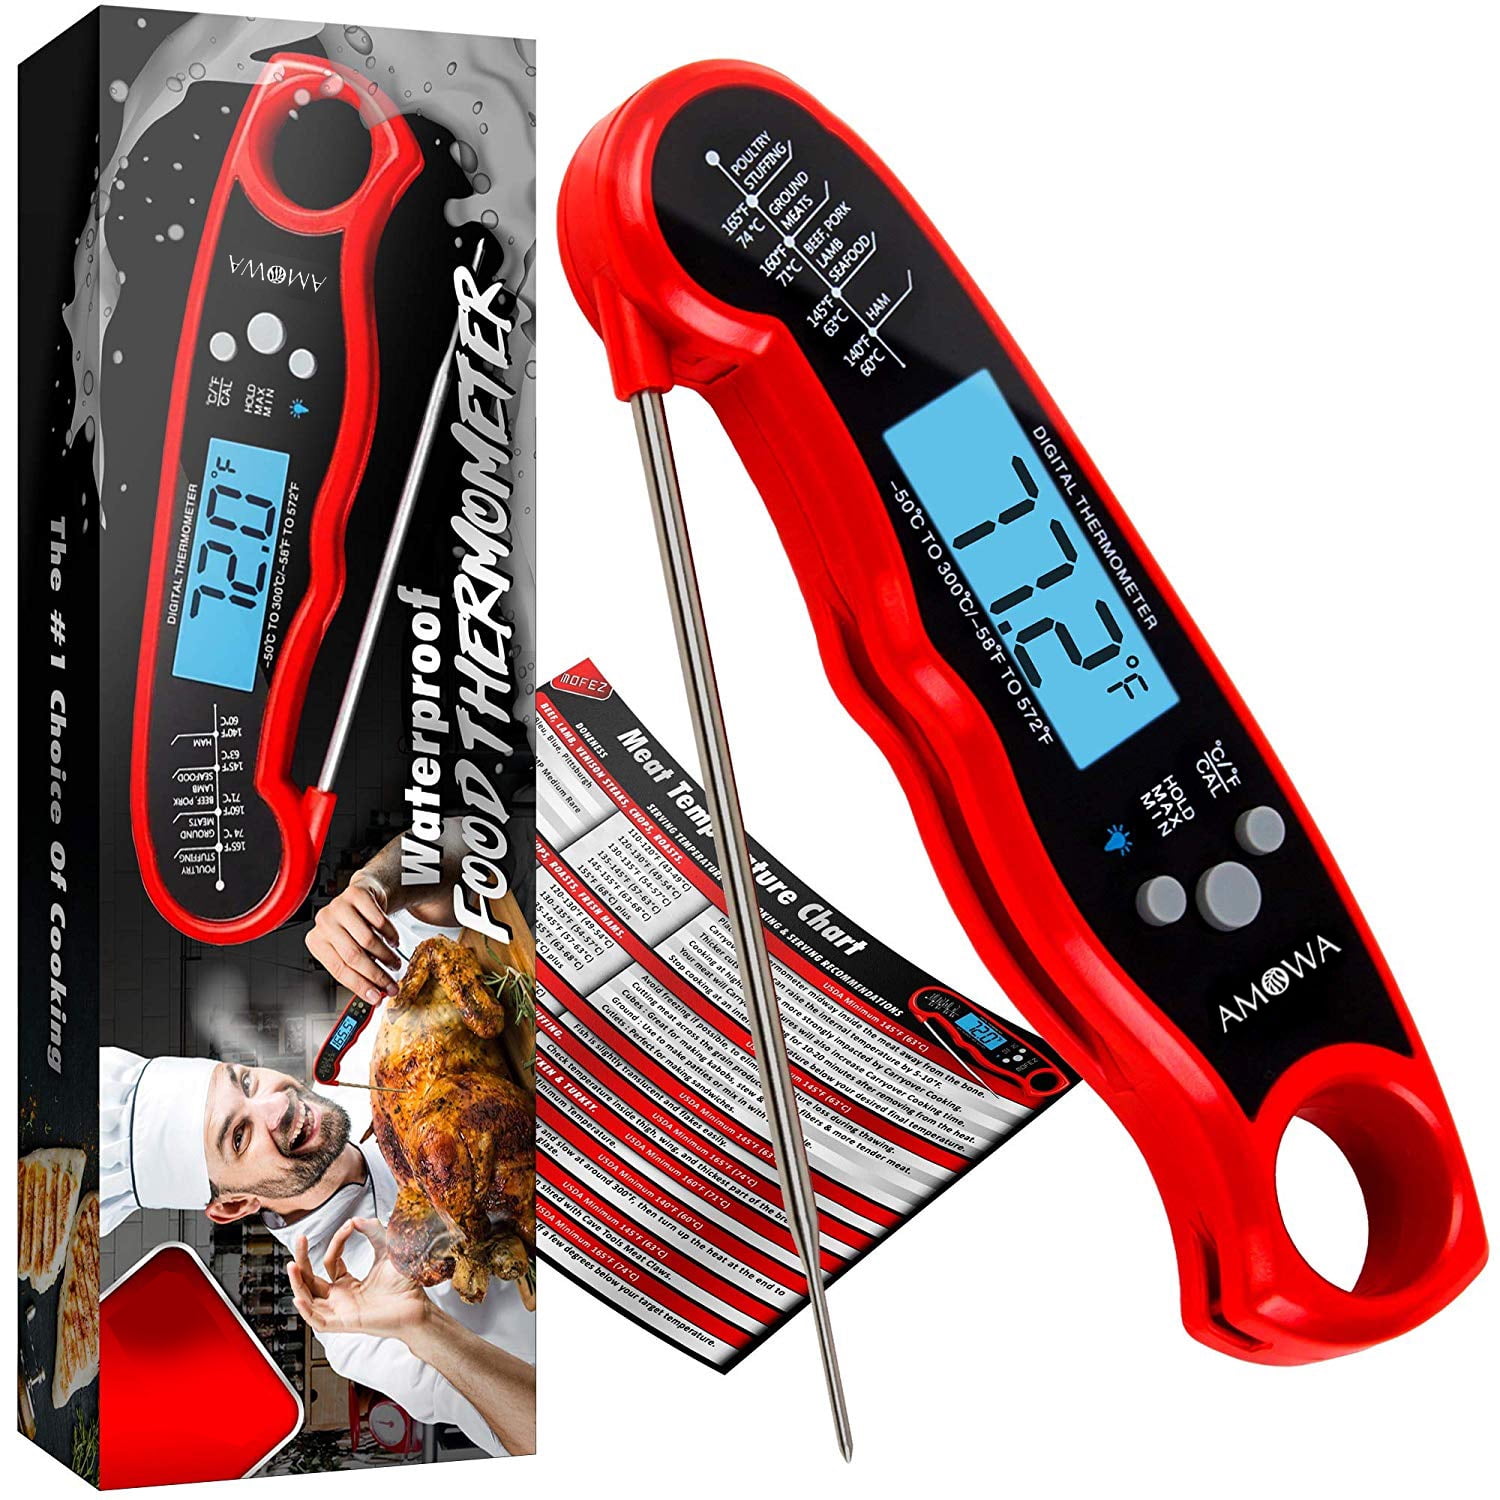 Instant Read Digital Meat Thermometer Probe for Cooking BBQ Grill Smoker Food US 